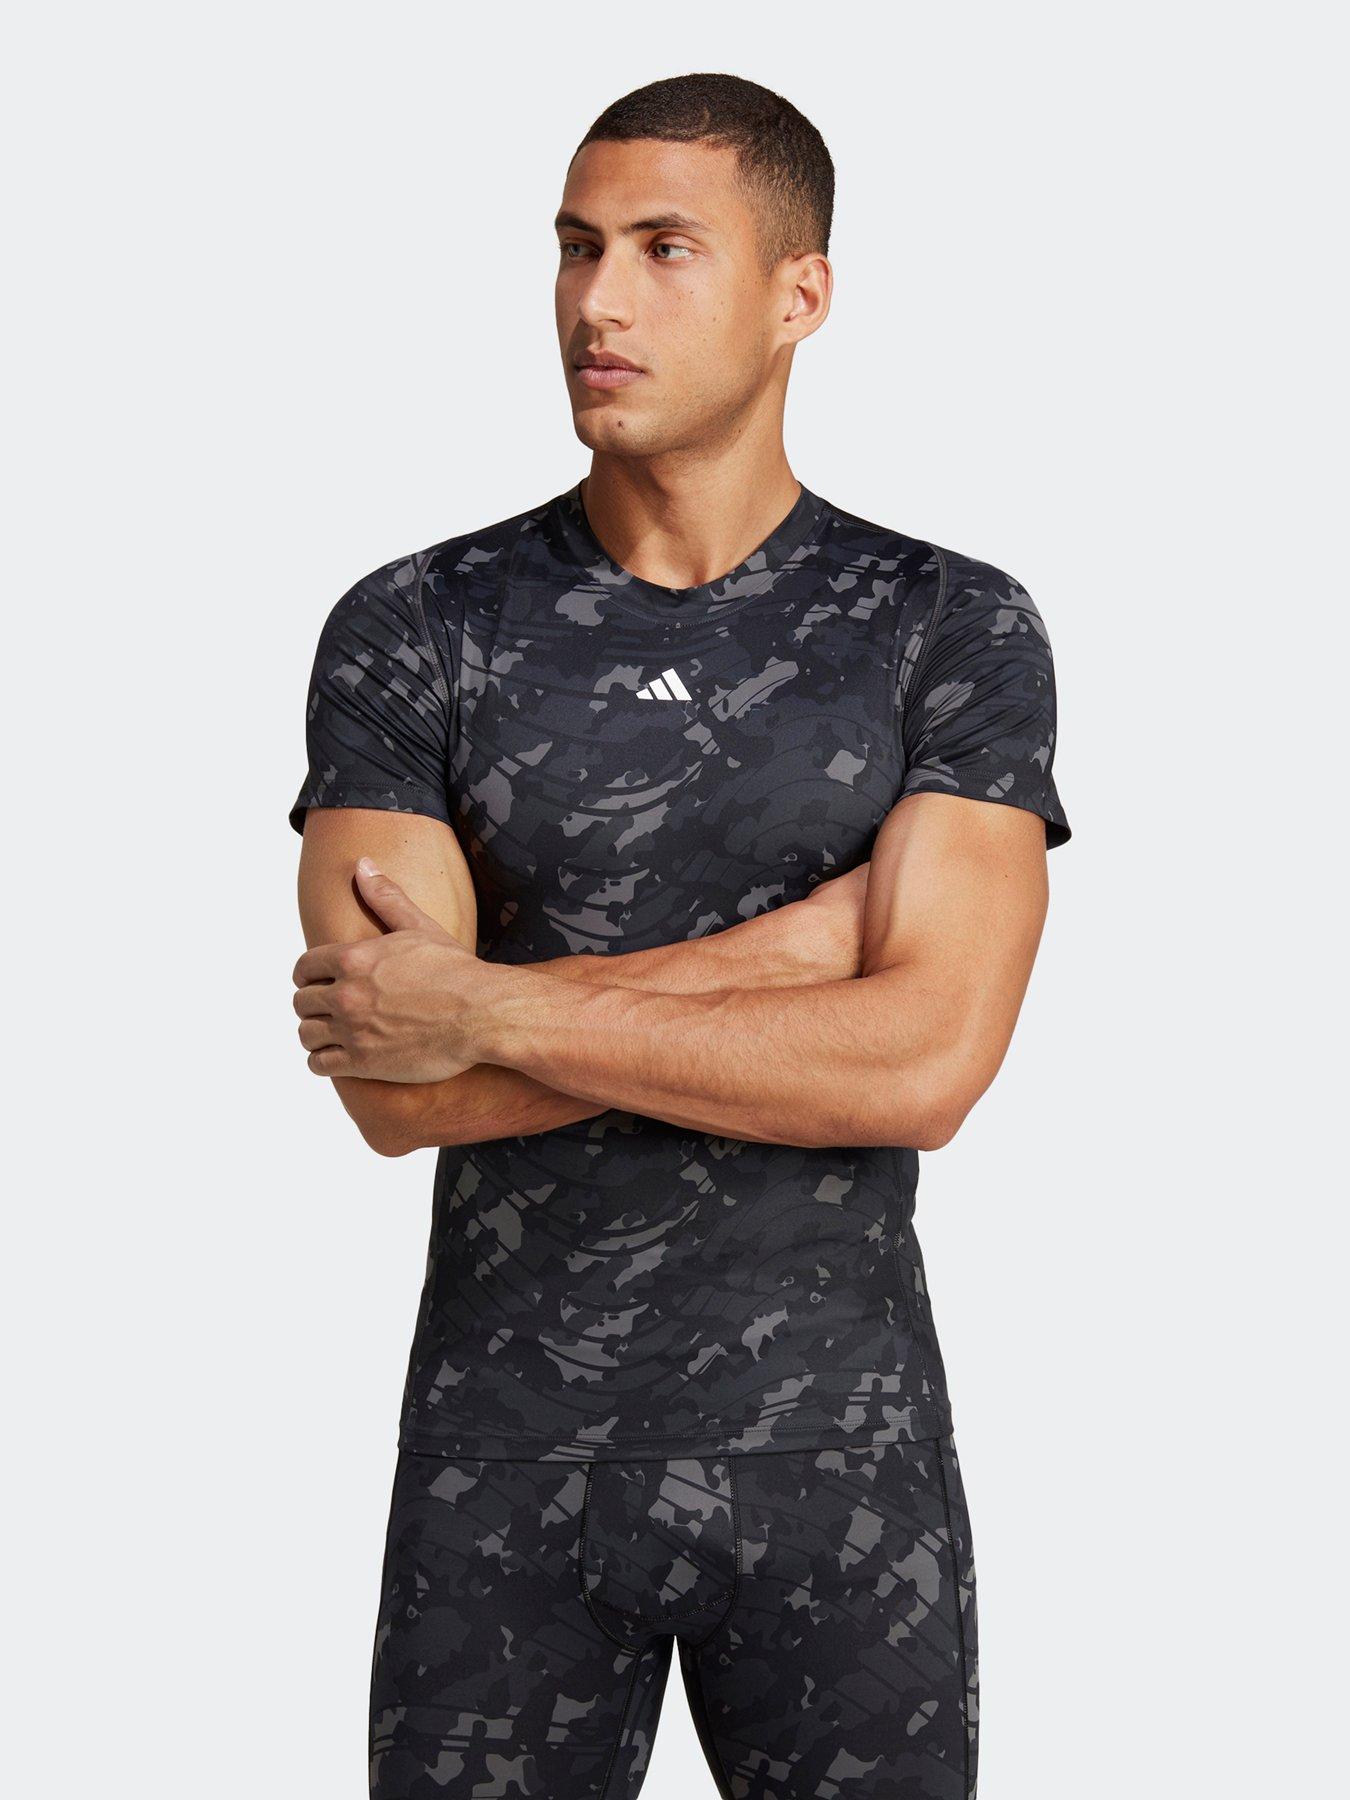 Shop Adidas Techfit Compression with great discounts and prices